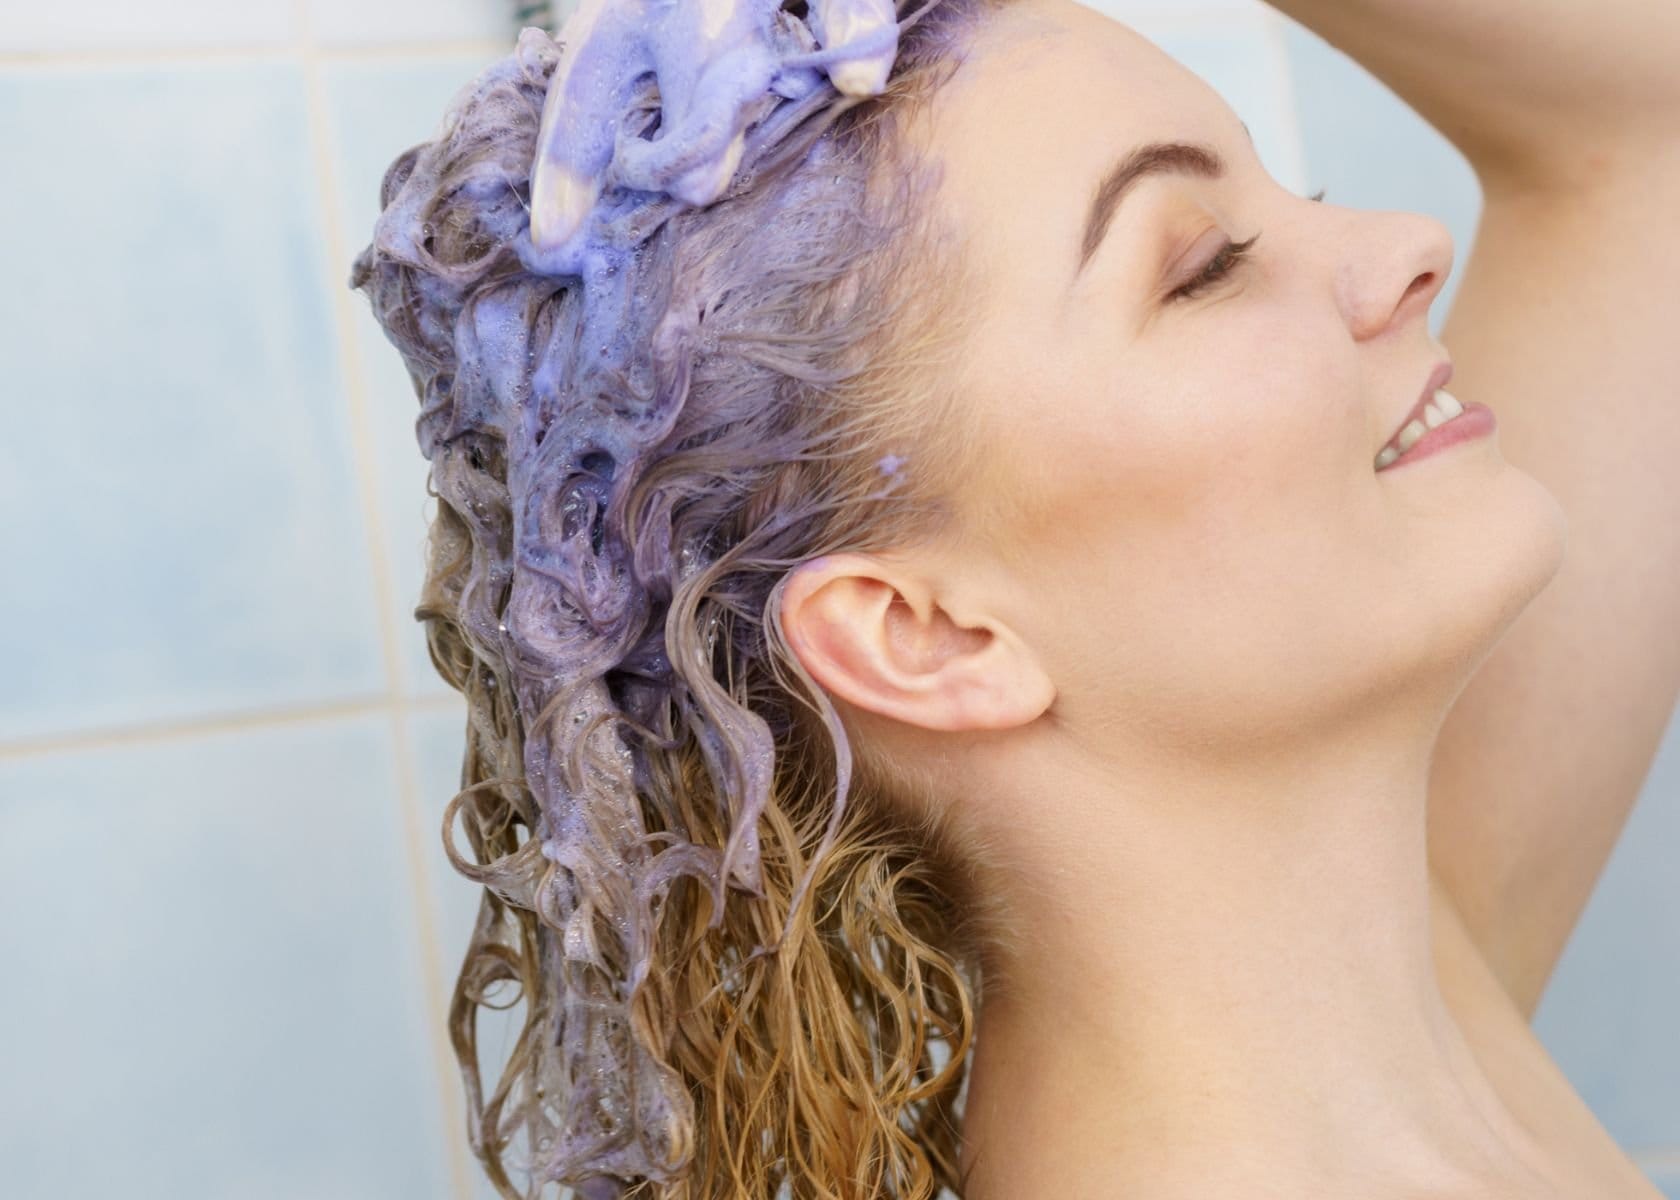 How to Safely Use Hair Toner?